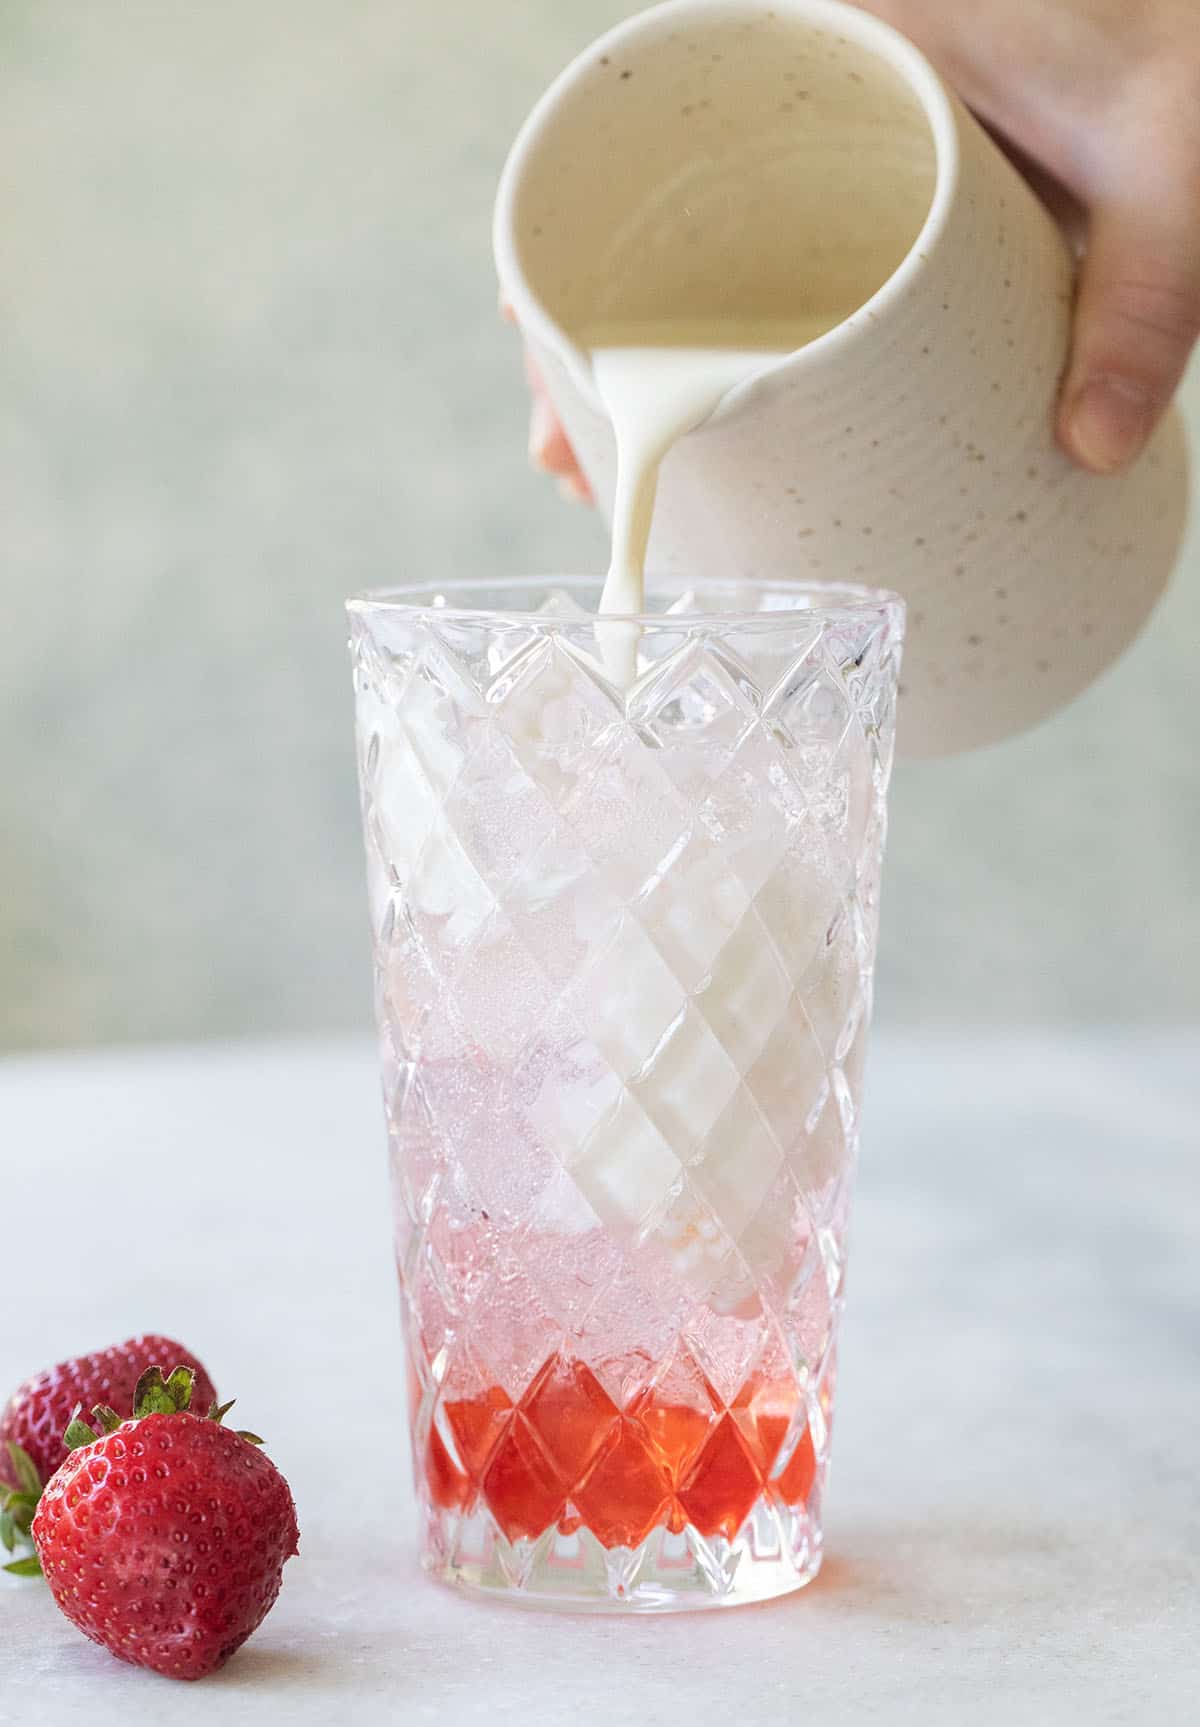 Pouring cream into a glass filled with ice and strawberry syrup to make an Italian soda.